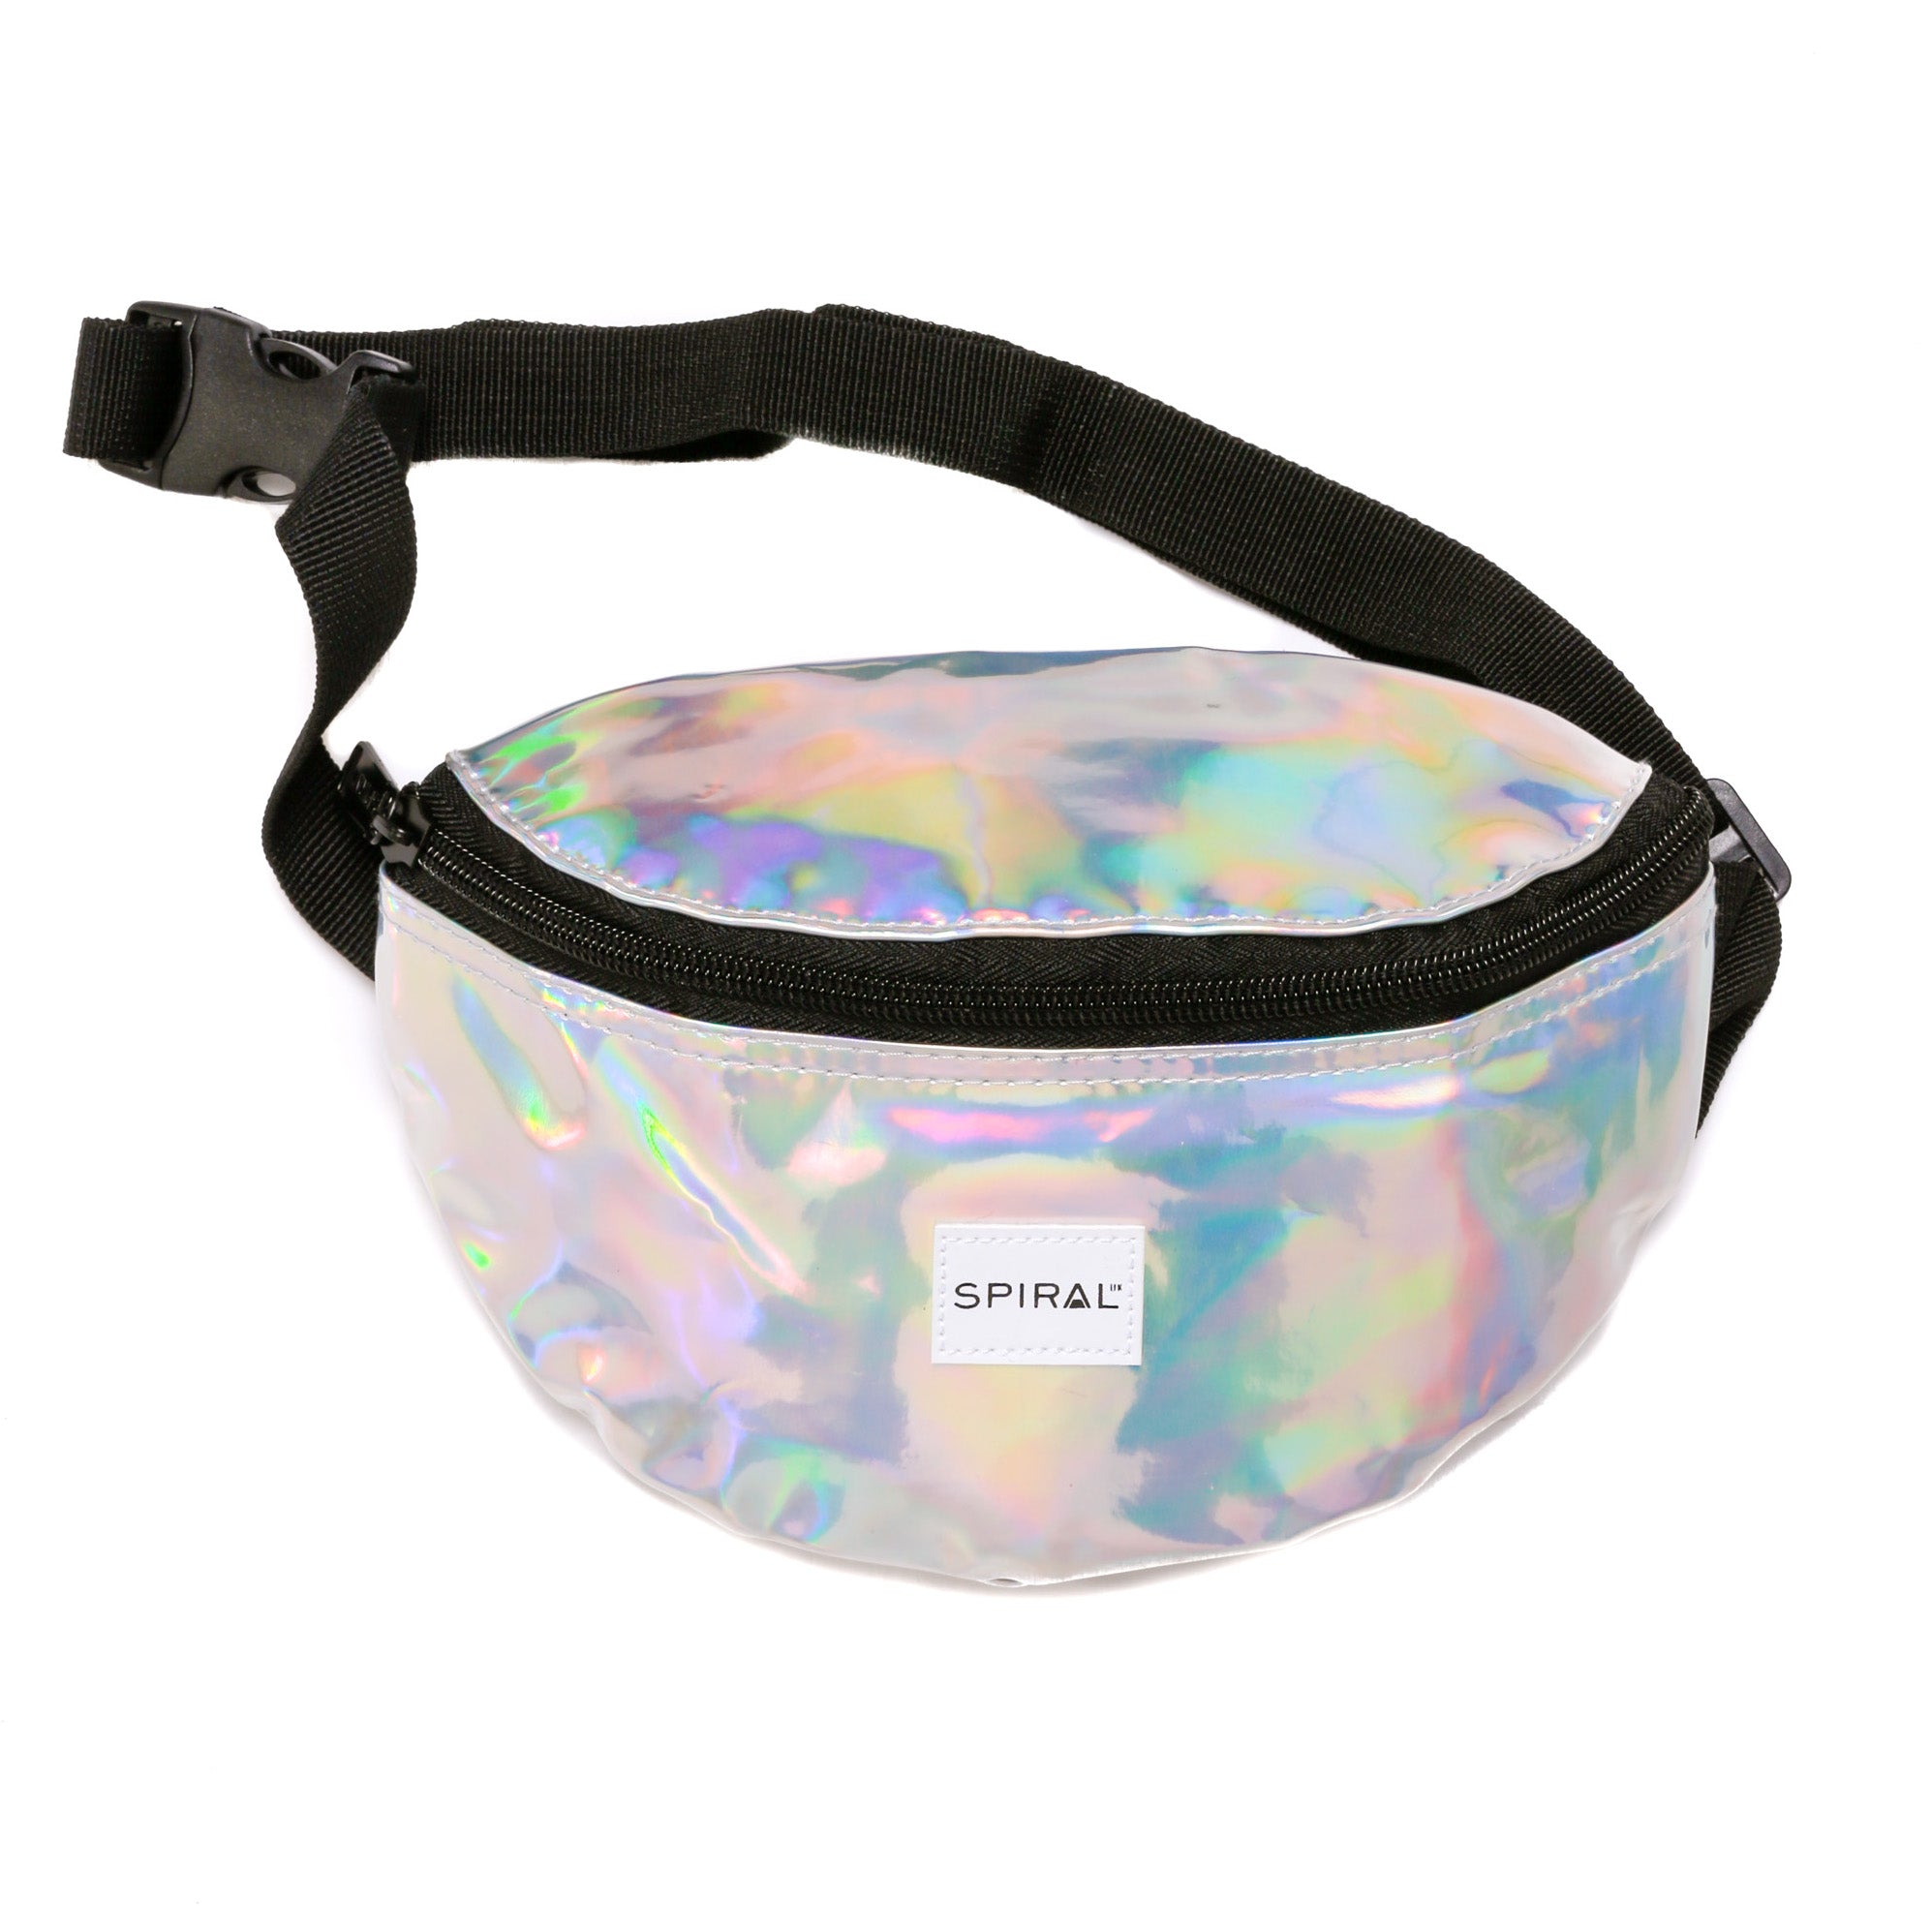 Ugly Fanny Pack Images | Paul Smith